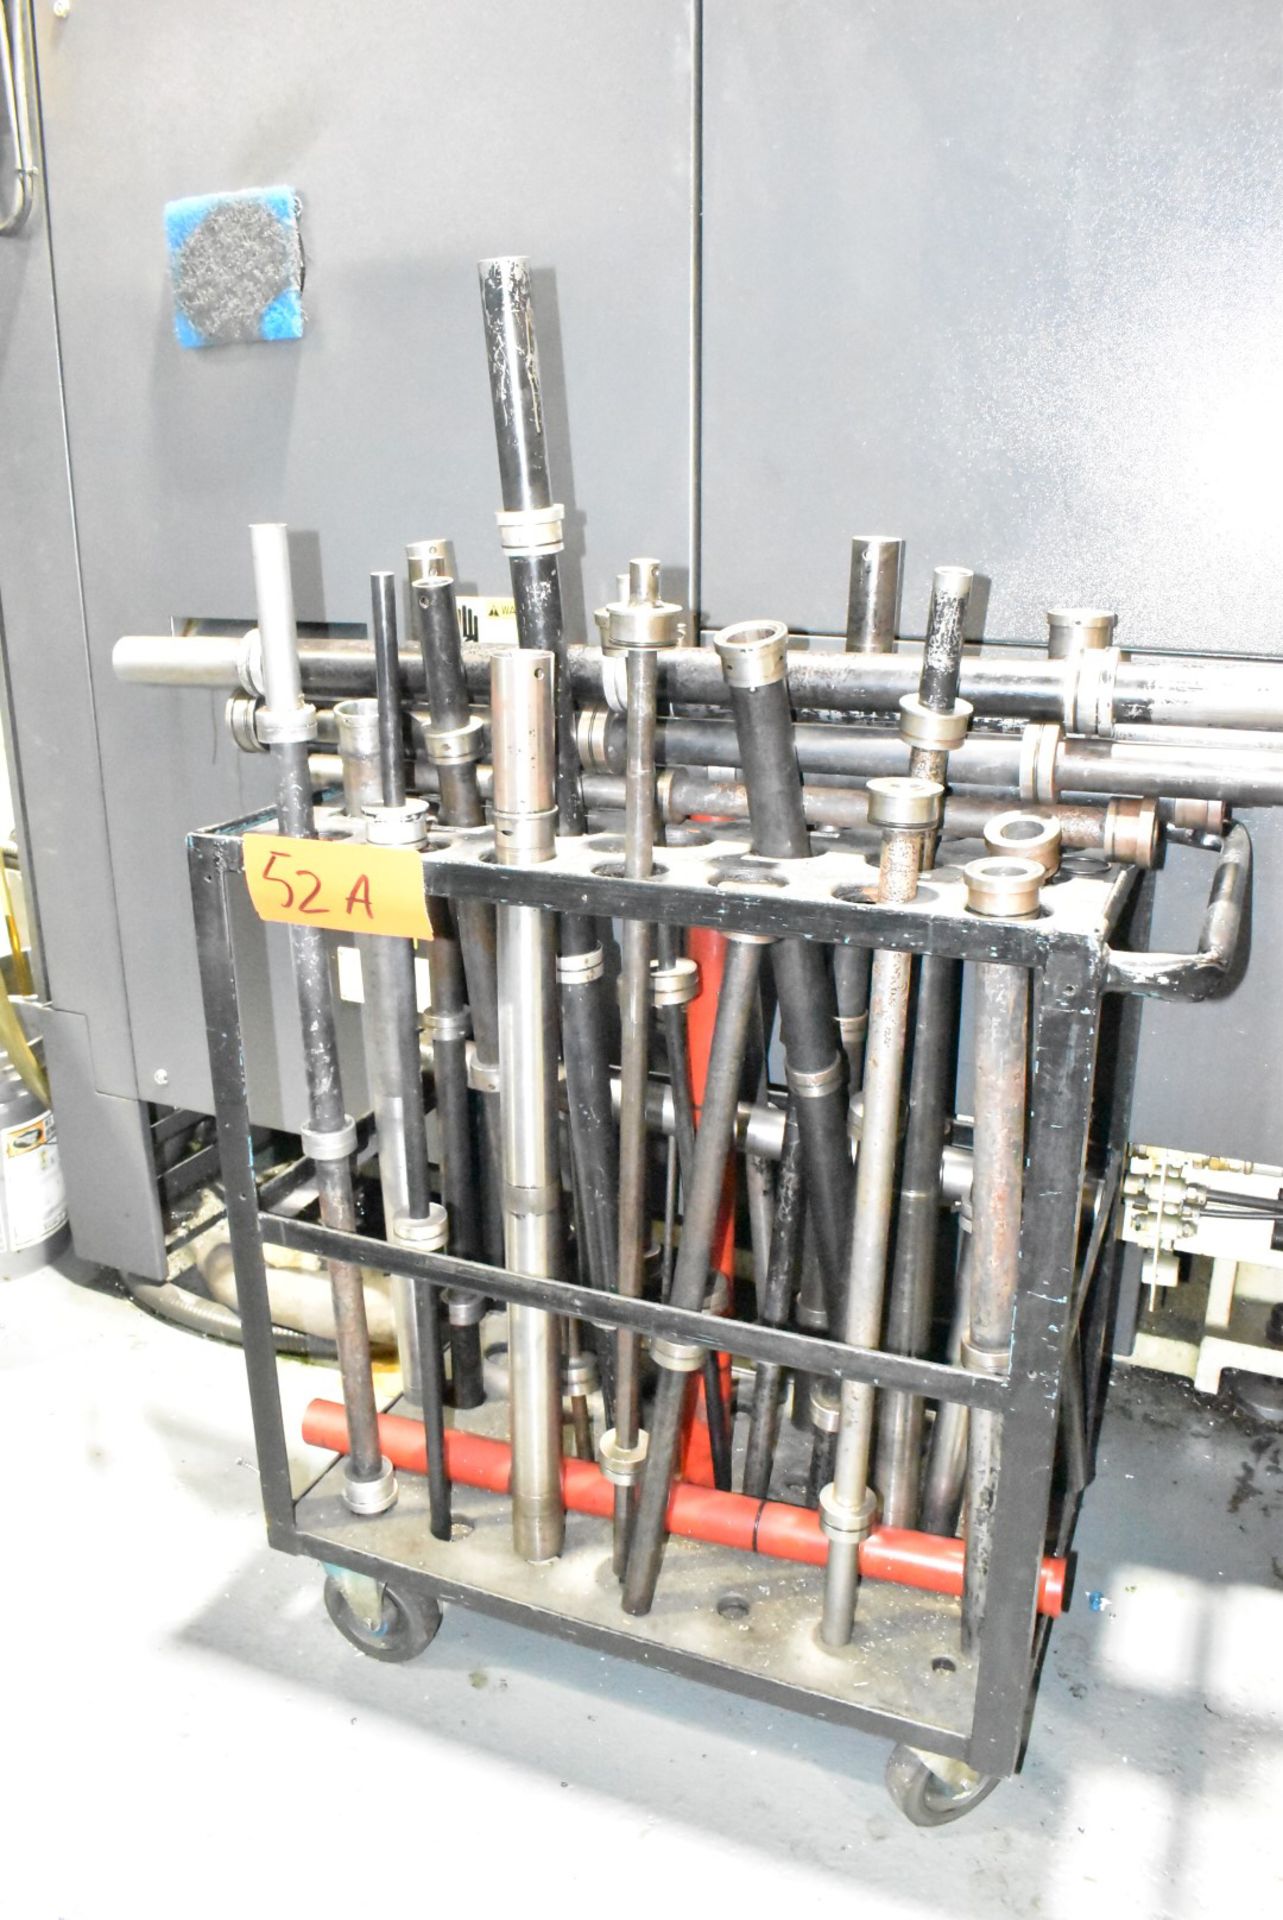 LOT/ CART WITH BAR FEEDER TUBES